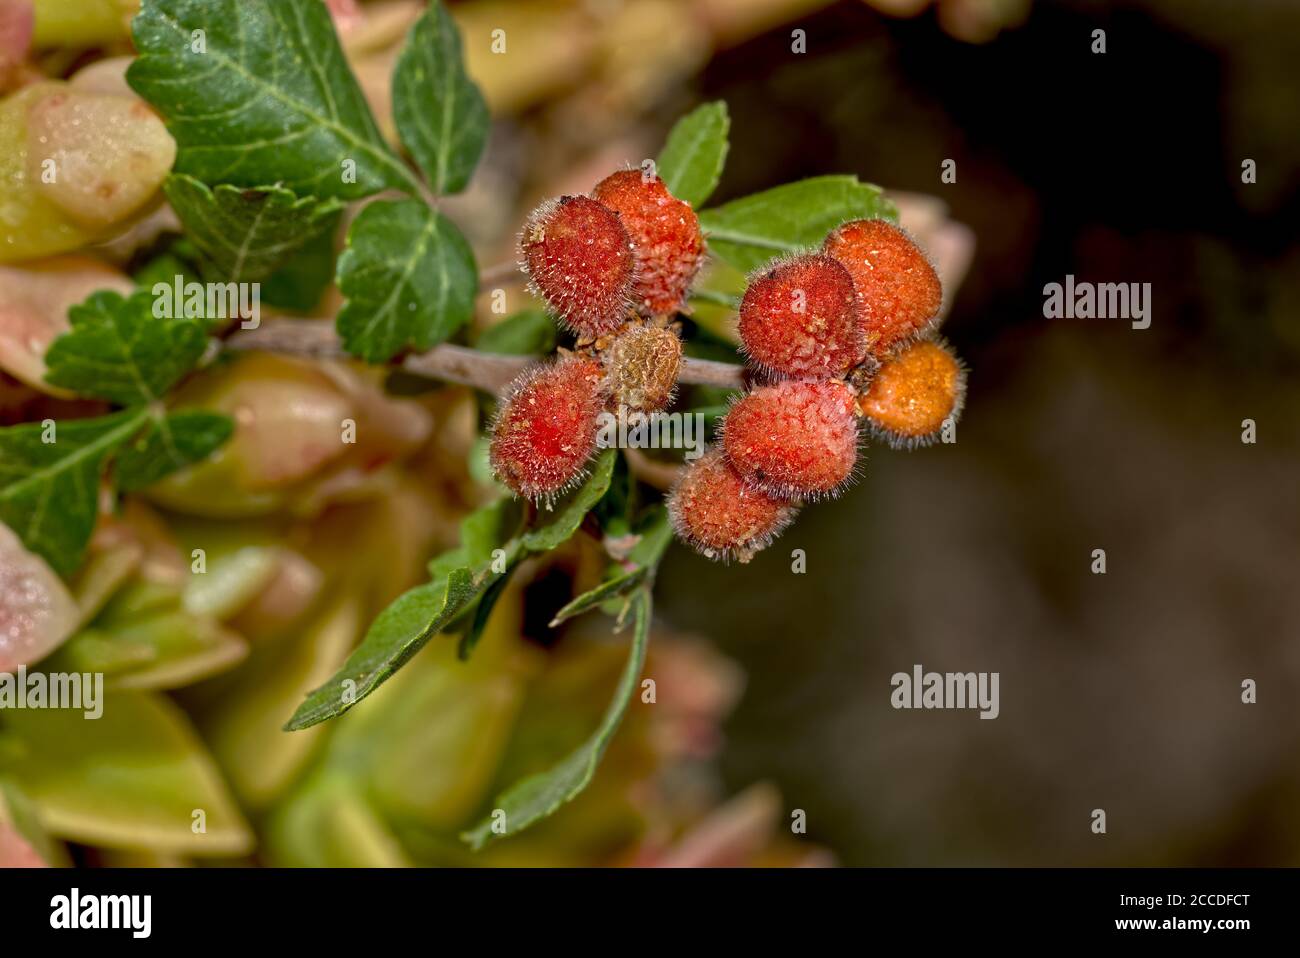 The fruit of the Fragrant Sumac native to Arizona, alson known as the Skunk Bush. The fruit is edible and tastes kind of tarty like a Lime. This fruit Stock Photo